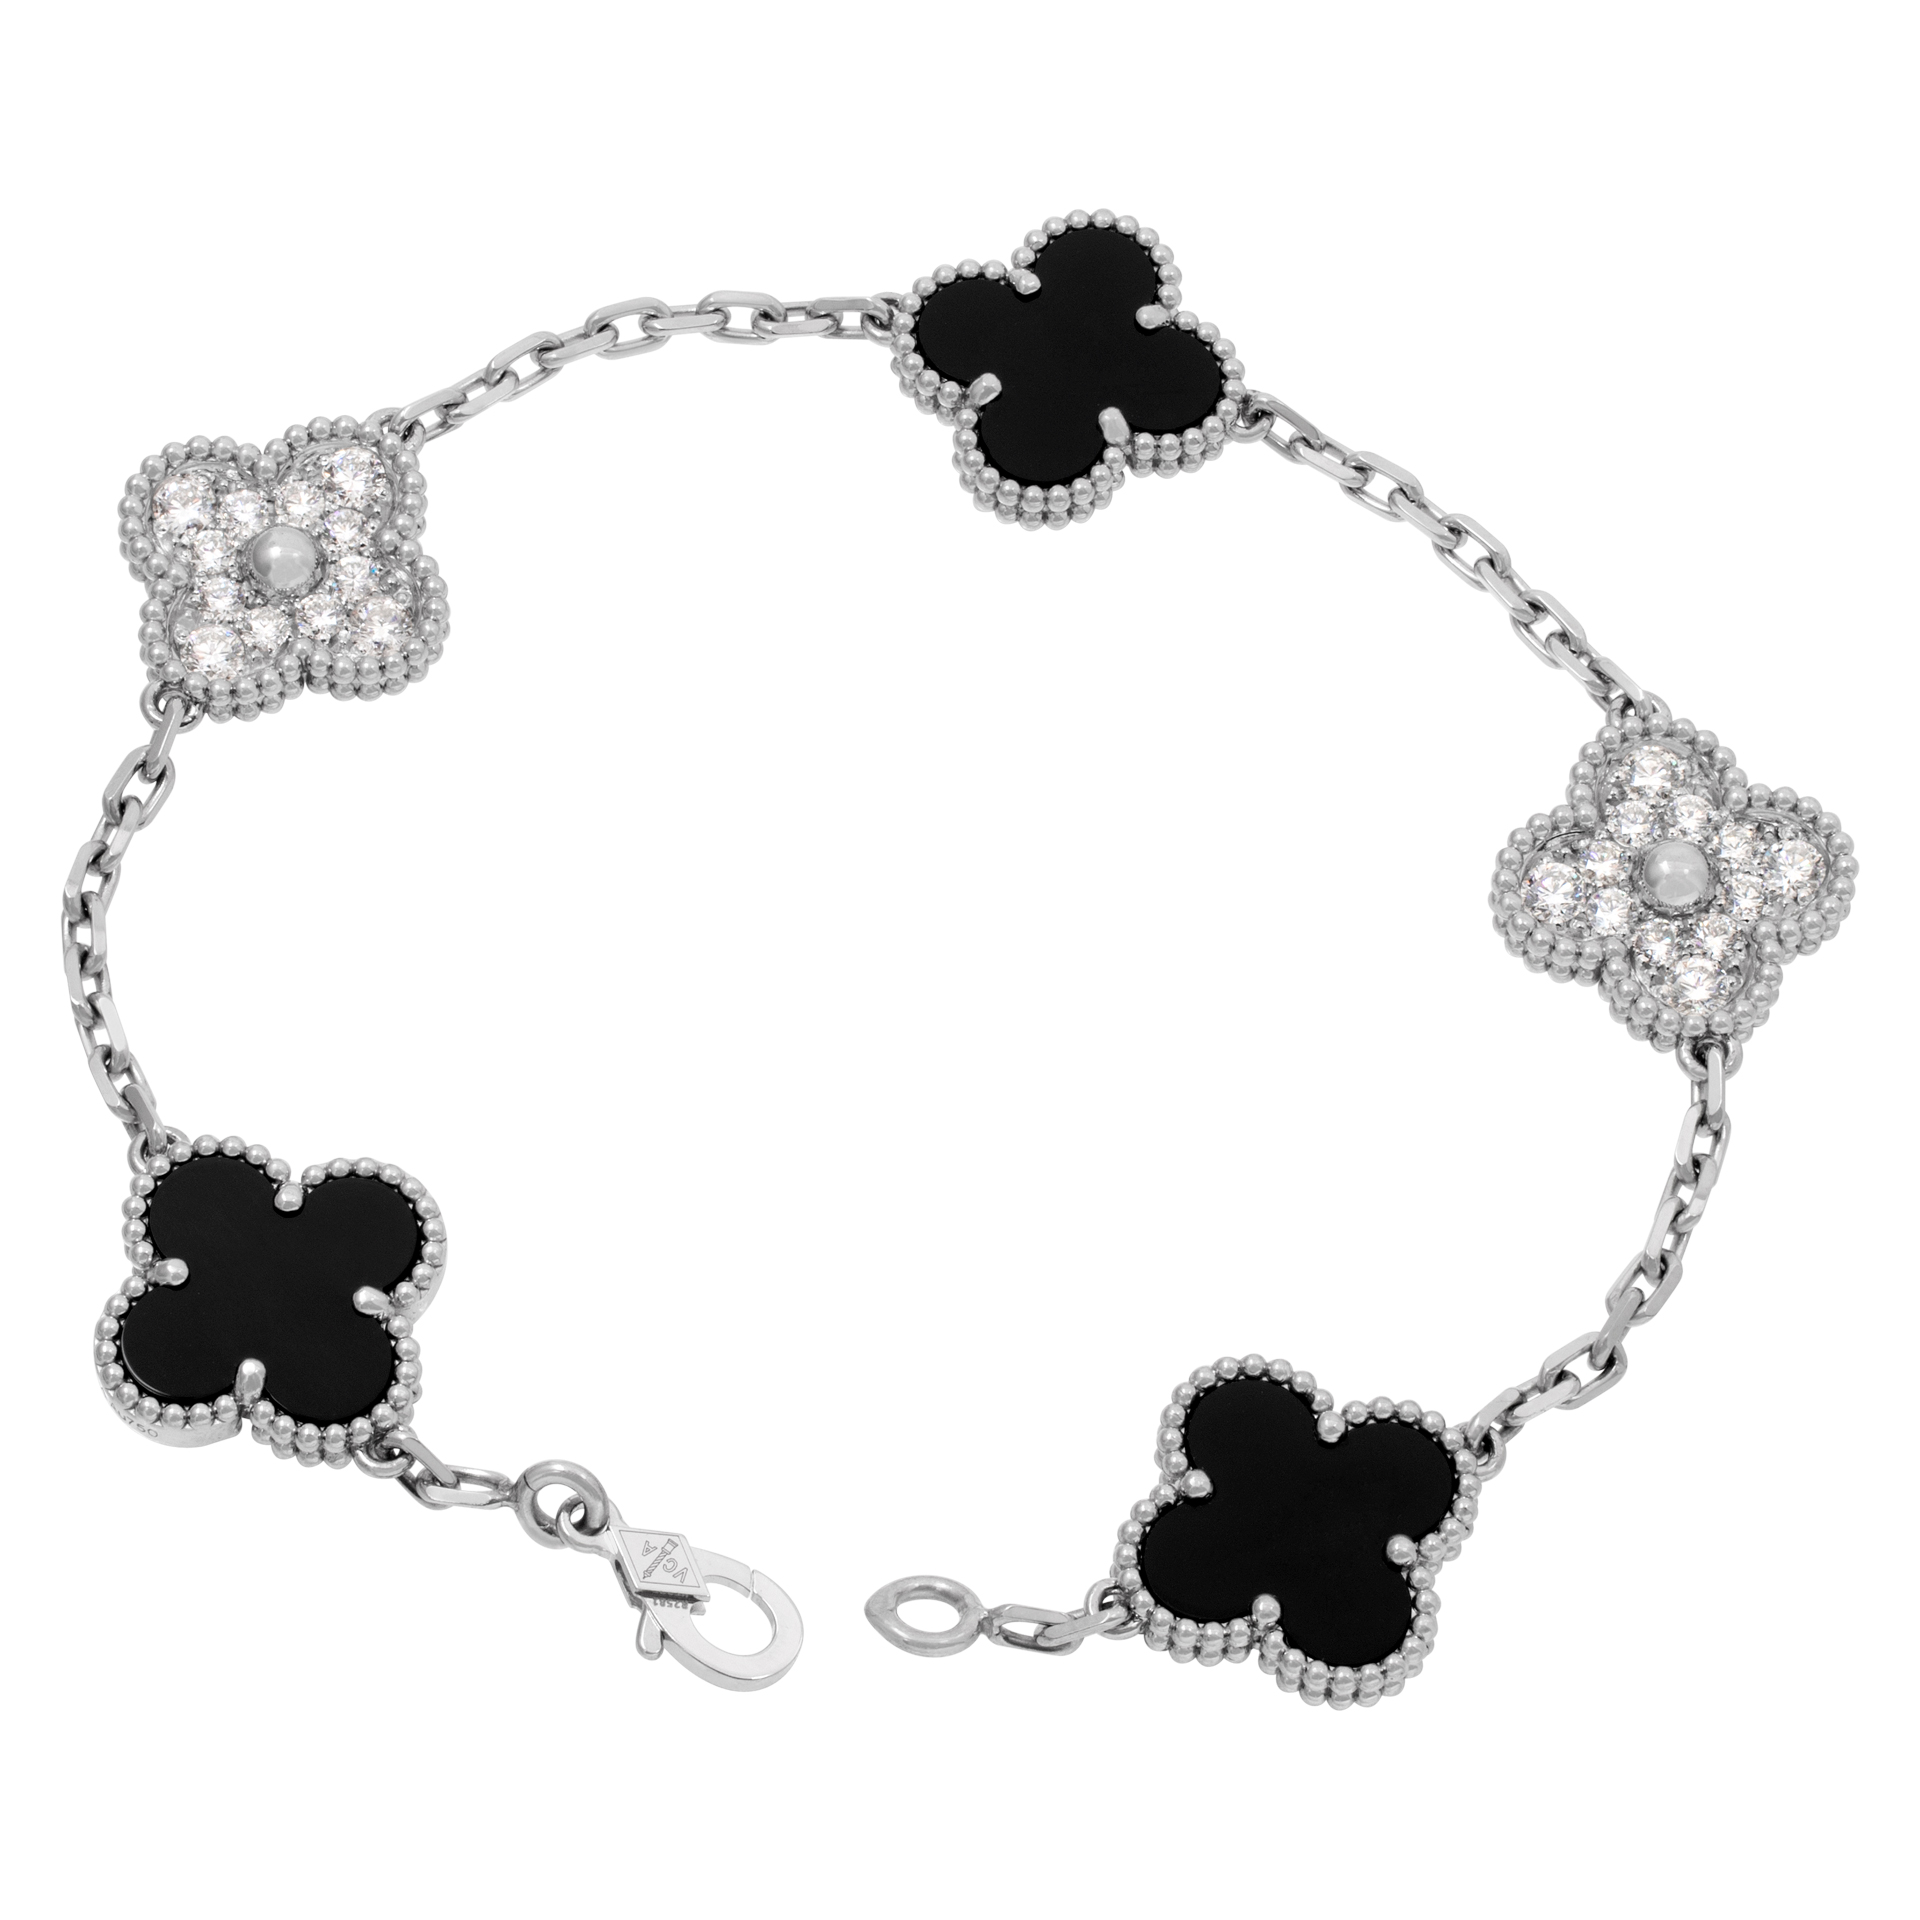 Van Cleef & Arpels Vintage Alhambra bracelet in 18k white gold with 3 onyx and 2 pave diamond motifs image 1